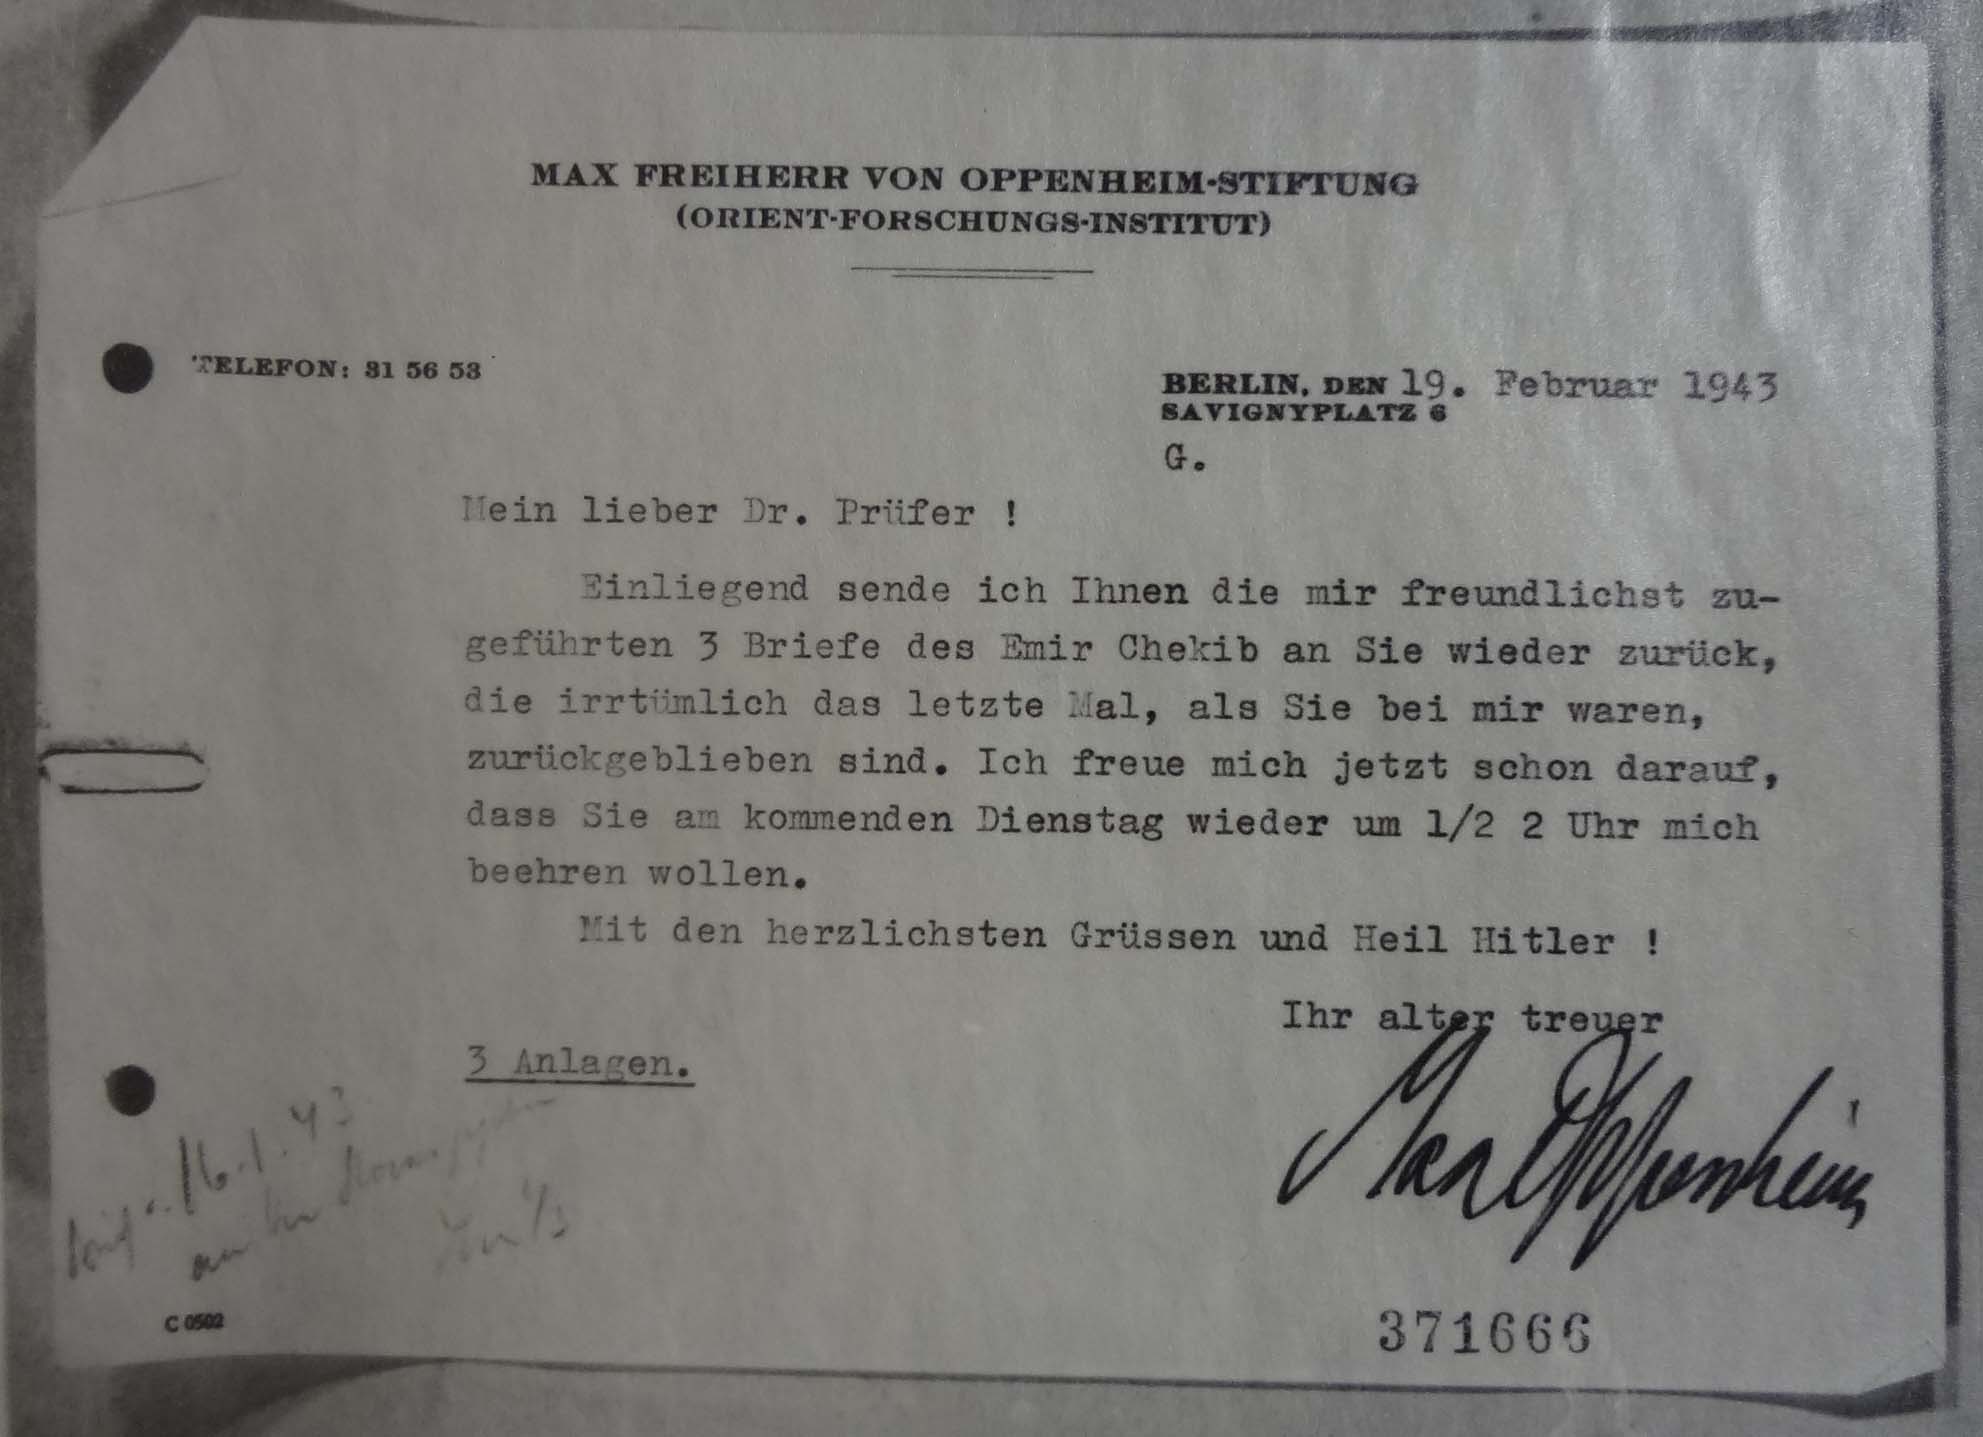 Max von Oppenheim to Curt Prüfer, 19 February 1943 (catalogue reference: GFM 33/607)